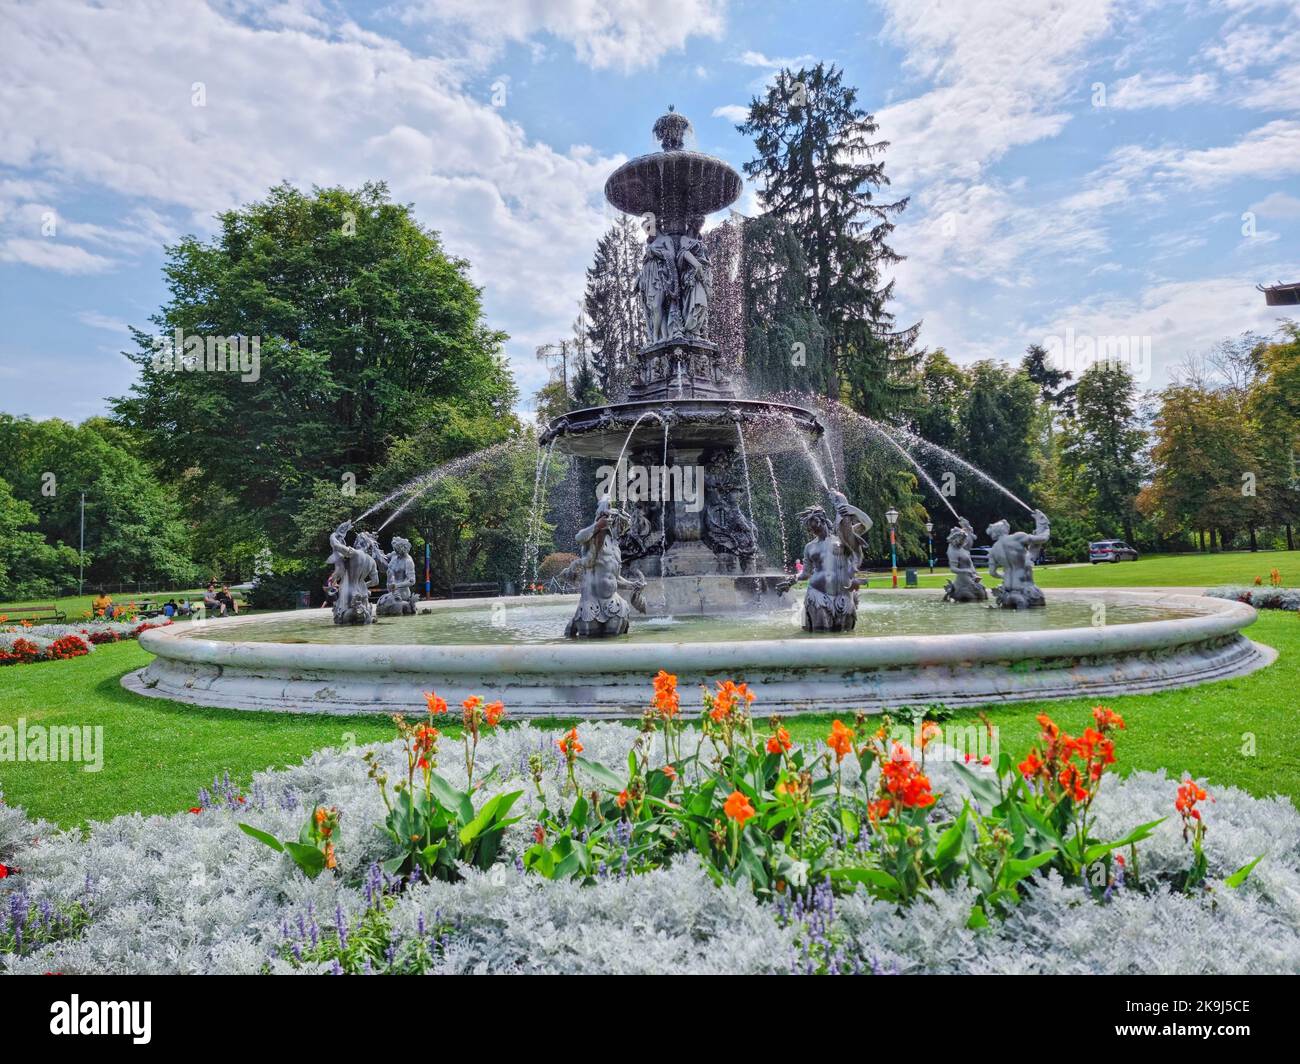 Beautiful fountain in the city park Stadtpark, a green island in the middle of the city center of Graz, Styria region, Austria. Selective focus Stock Photo